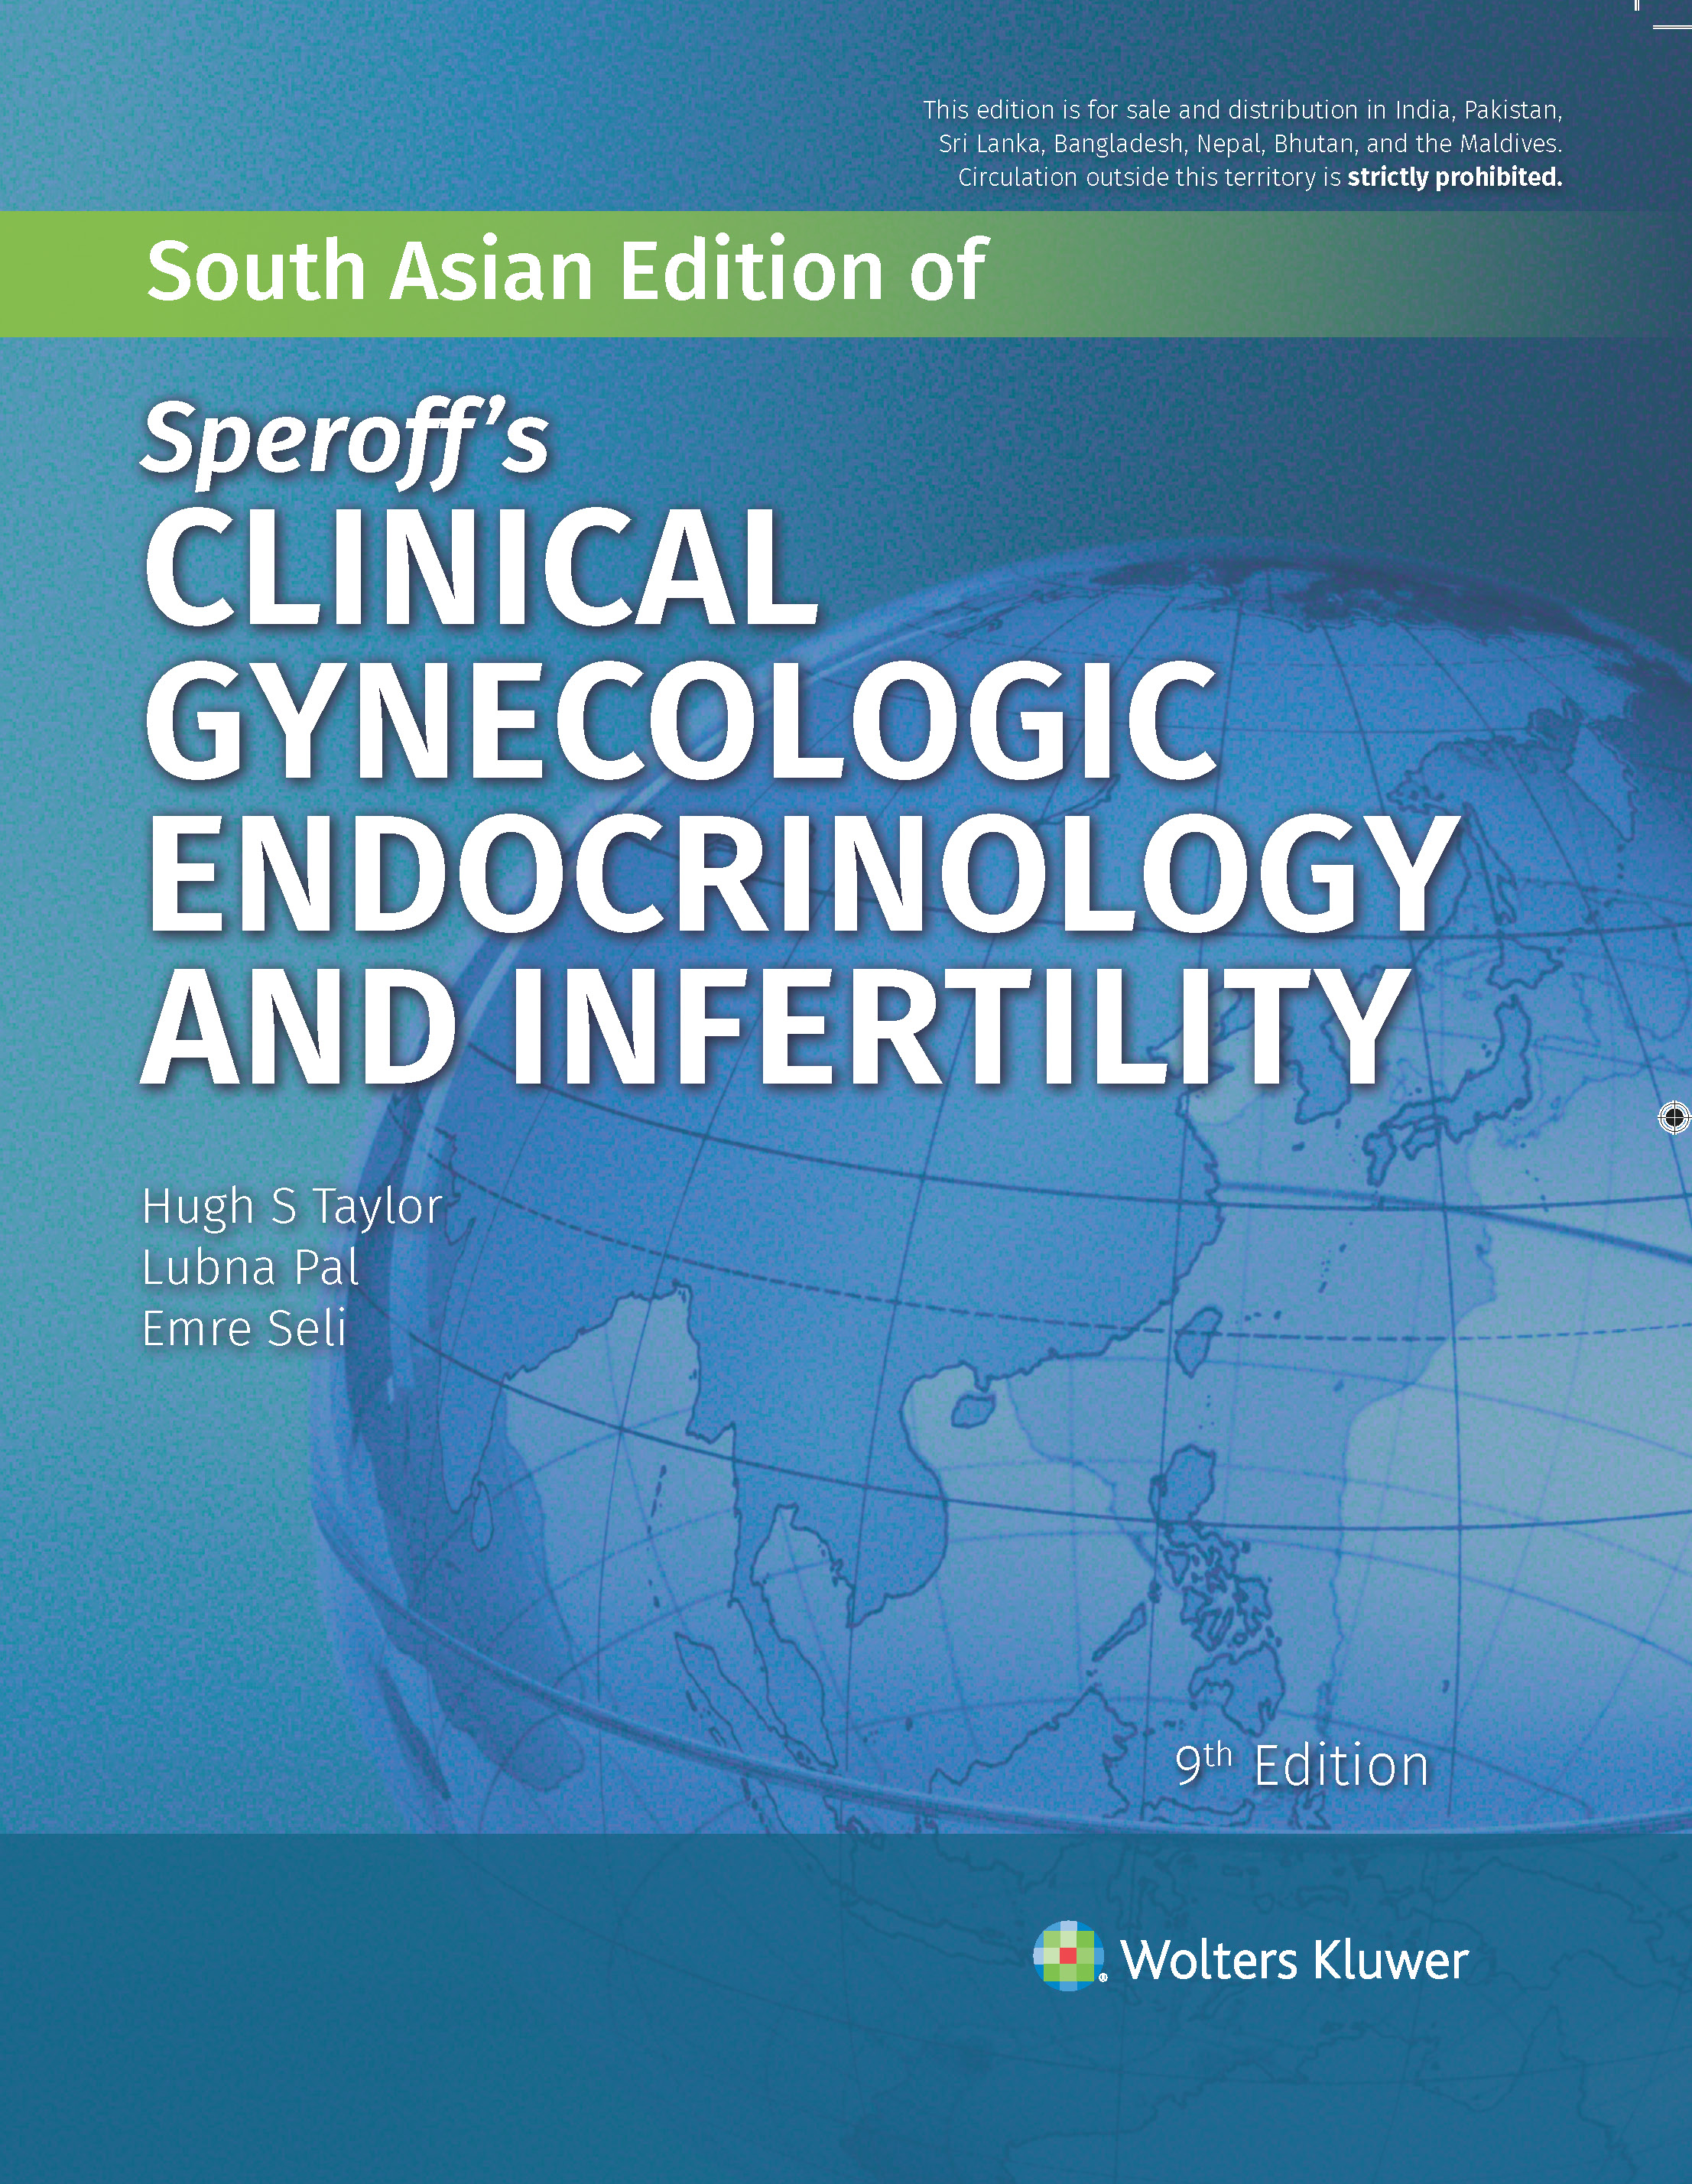 Speroff Clinical Gynecologic Endocrinology And Infertility, 9E (With Scratch Codes)